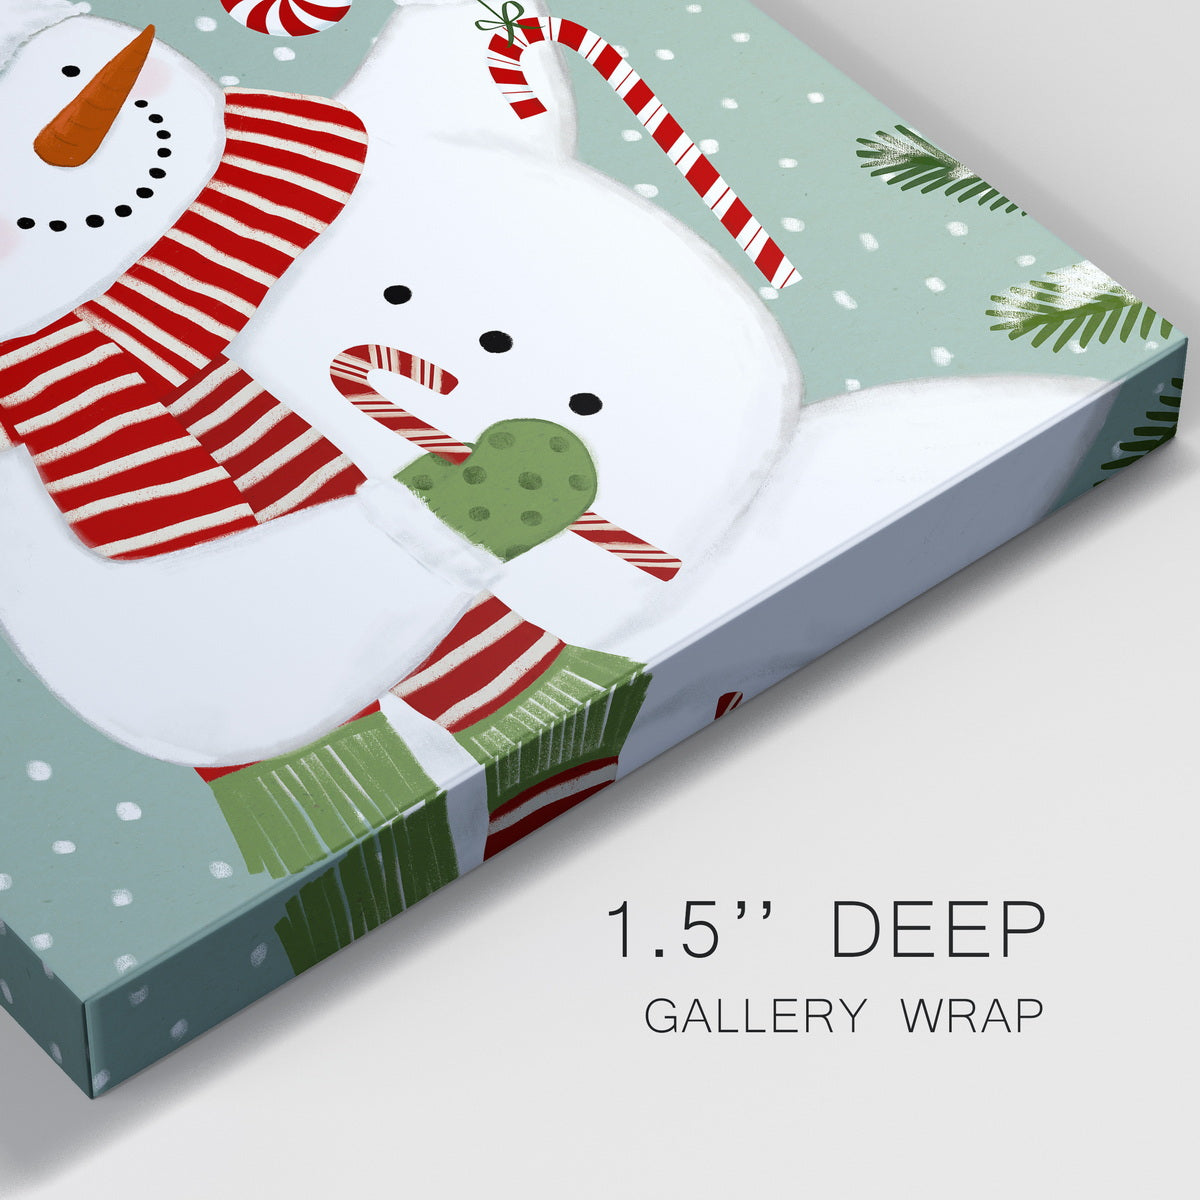 Peppermint Snowman I-Premium Gallery Wrapped Canvas - Ready to Hang